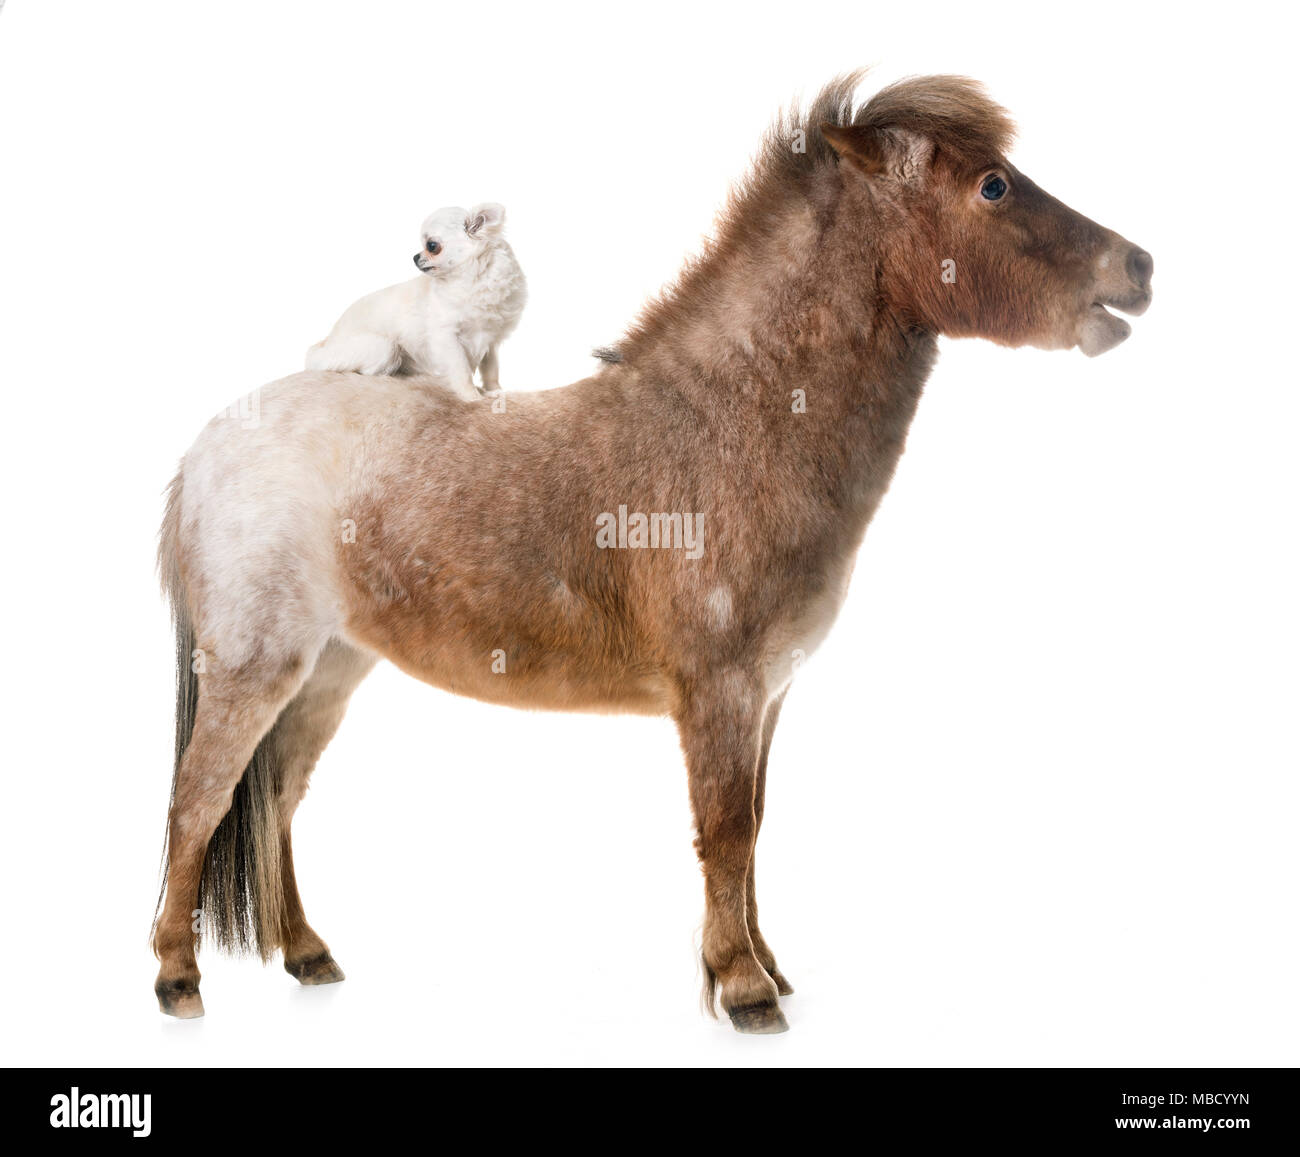 Falabella miniature horse in front of white background Stock Photo